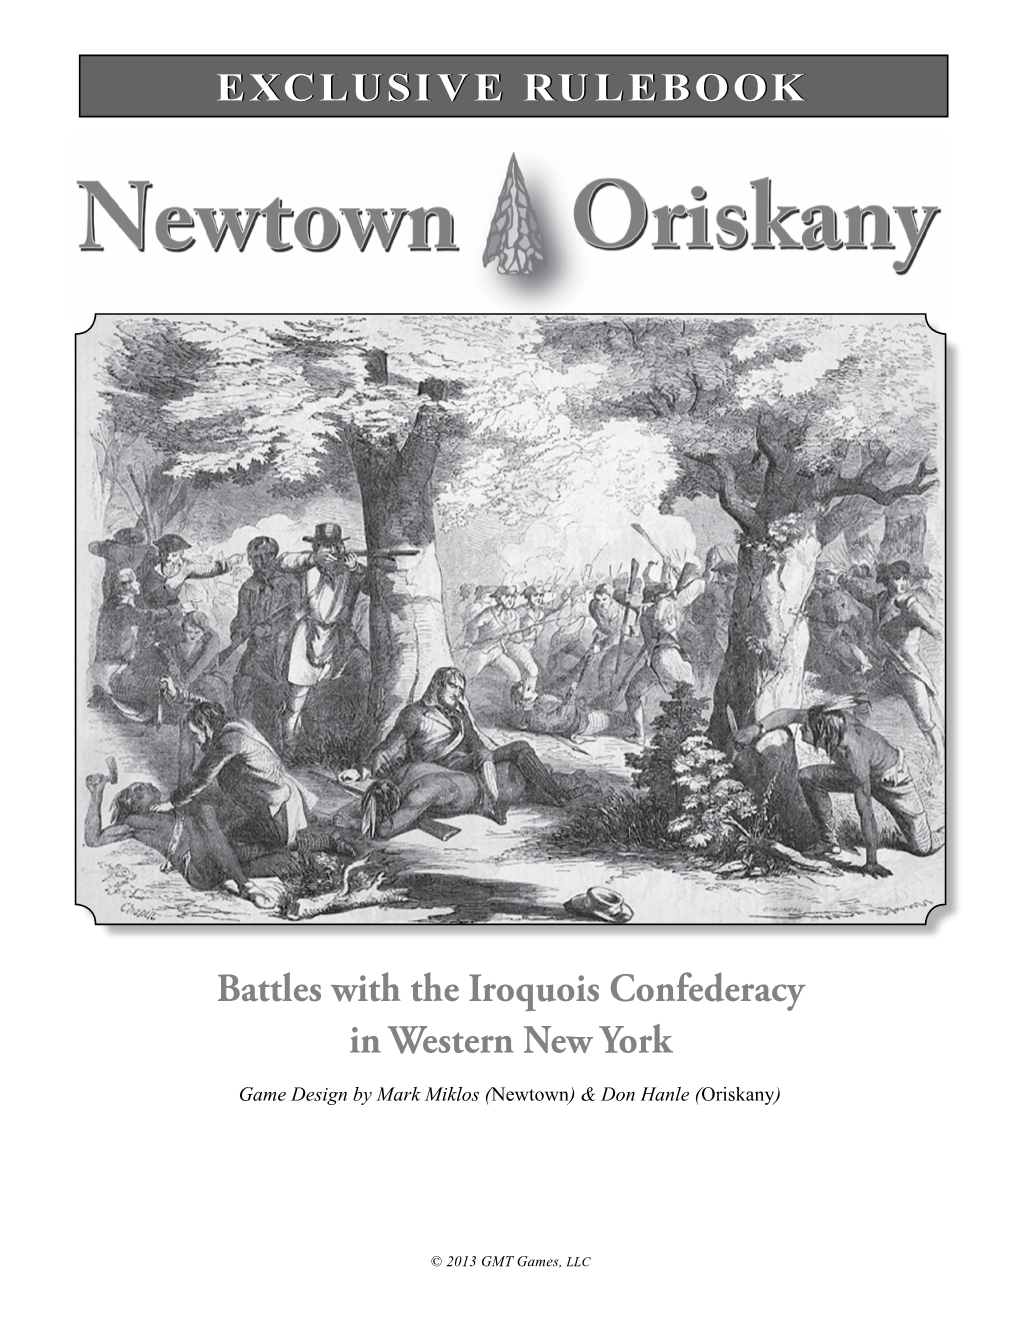 Battles with the Iroquois Confederacy in Western New York